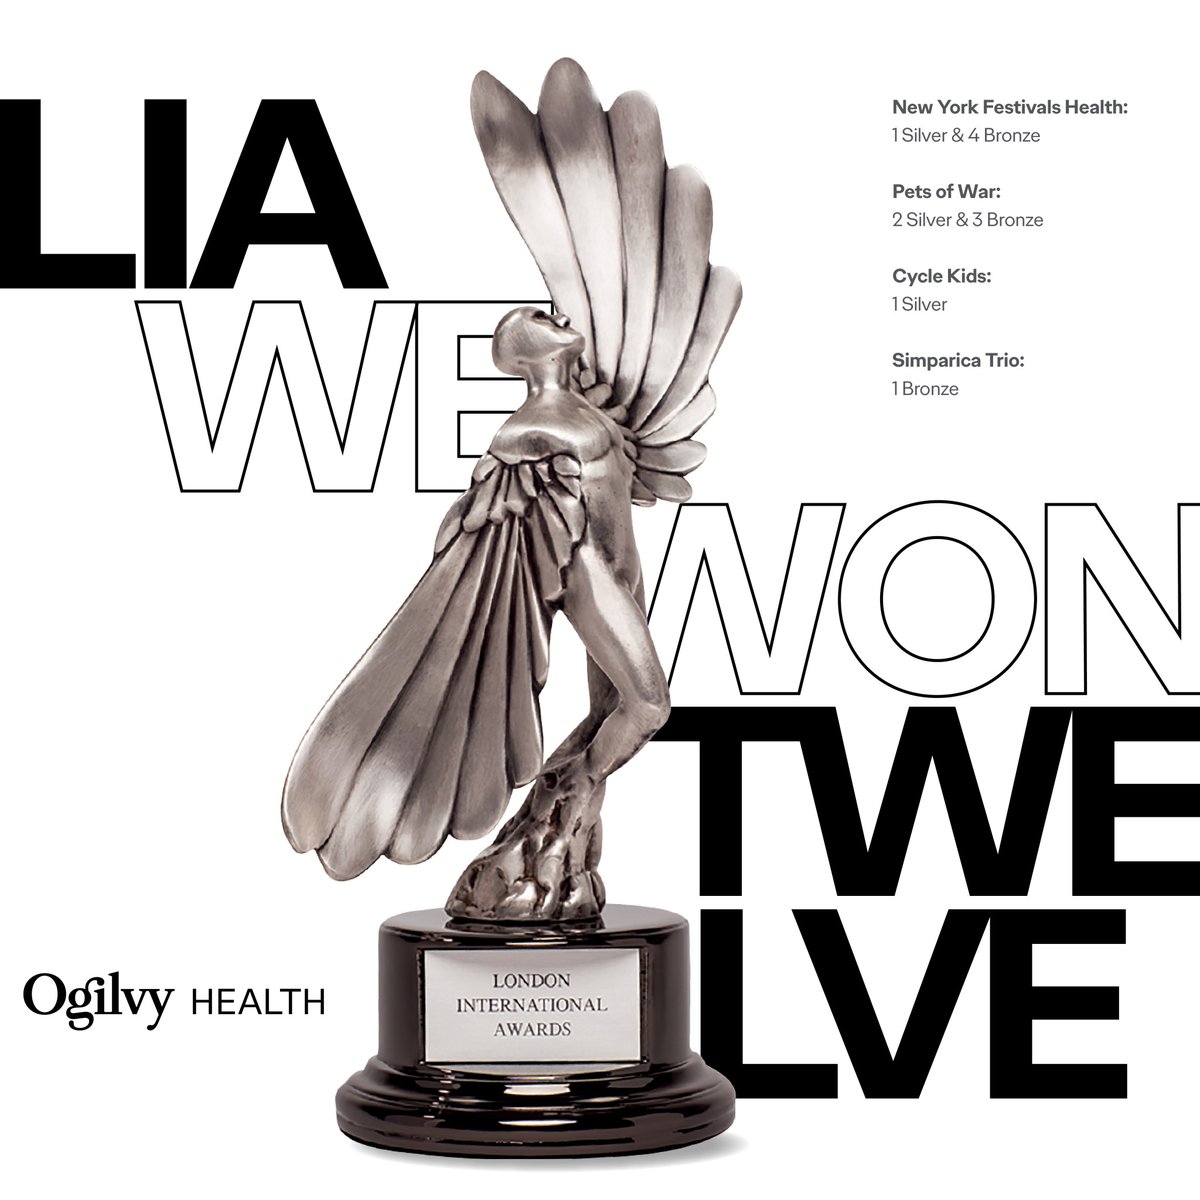 🏆AWARD ALERT🏆 OH has won 12 London International Awards! 4 silvers and 8 bronze have been awarded to campaigns on which we were honored to collaborate. Kudos to our talented OH family for making these campaigns shine. Stay tuned, more details to come...! bit.ly/3CHJtco